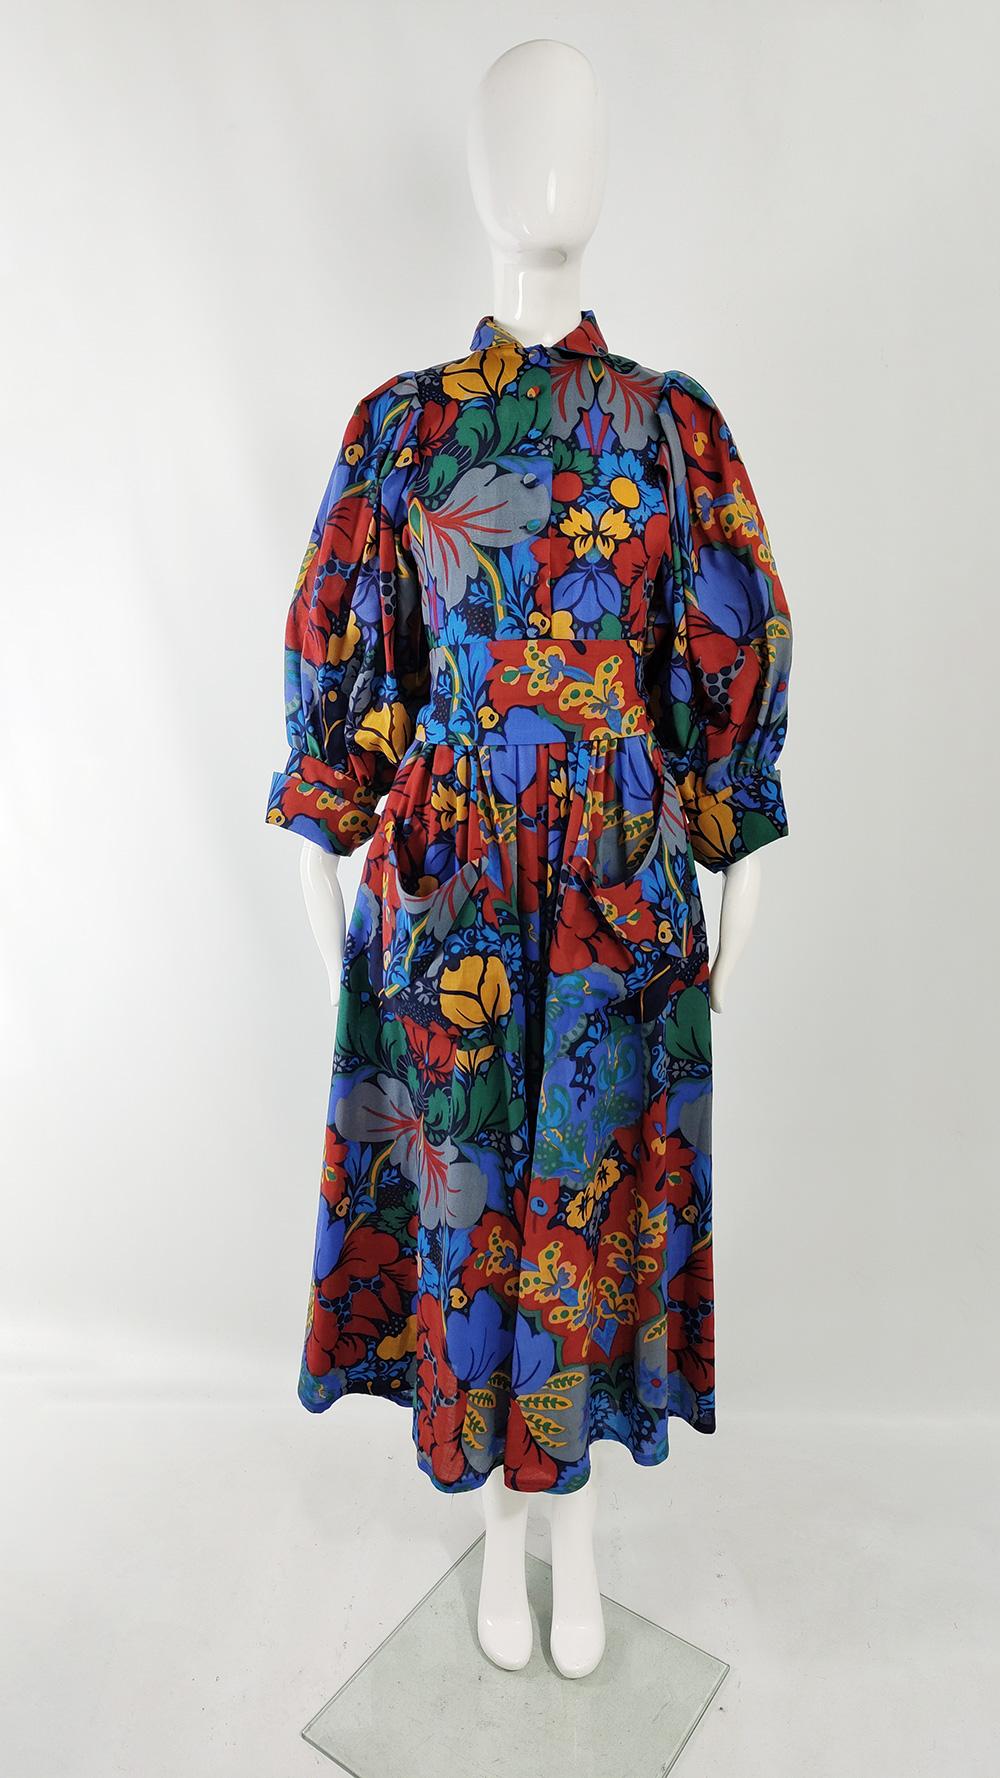 An incredible vintage womens maxi dress from the 80s by luxury British fashion designer, Angela Holmes for her Droopy & Browns label. Founded in 1972,in the English city of York, Droopy & Brown's designs were as historical as the city itself - often